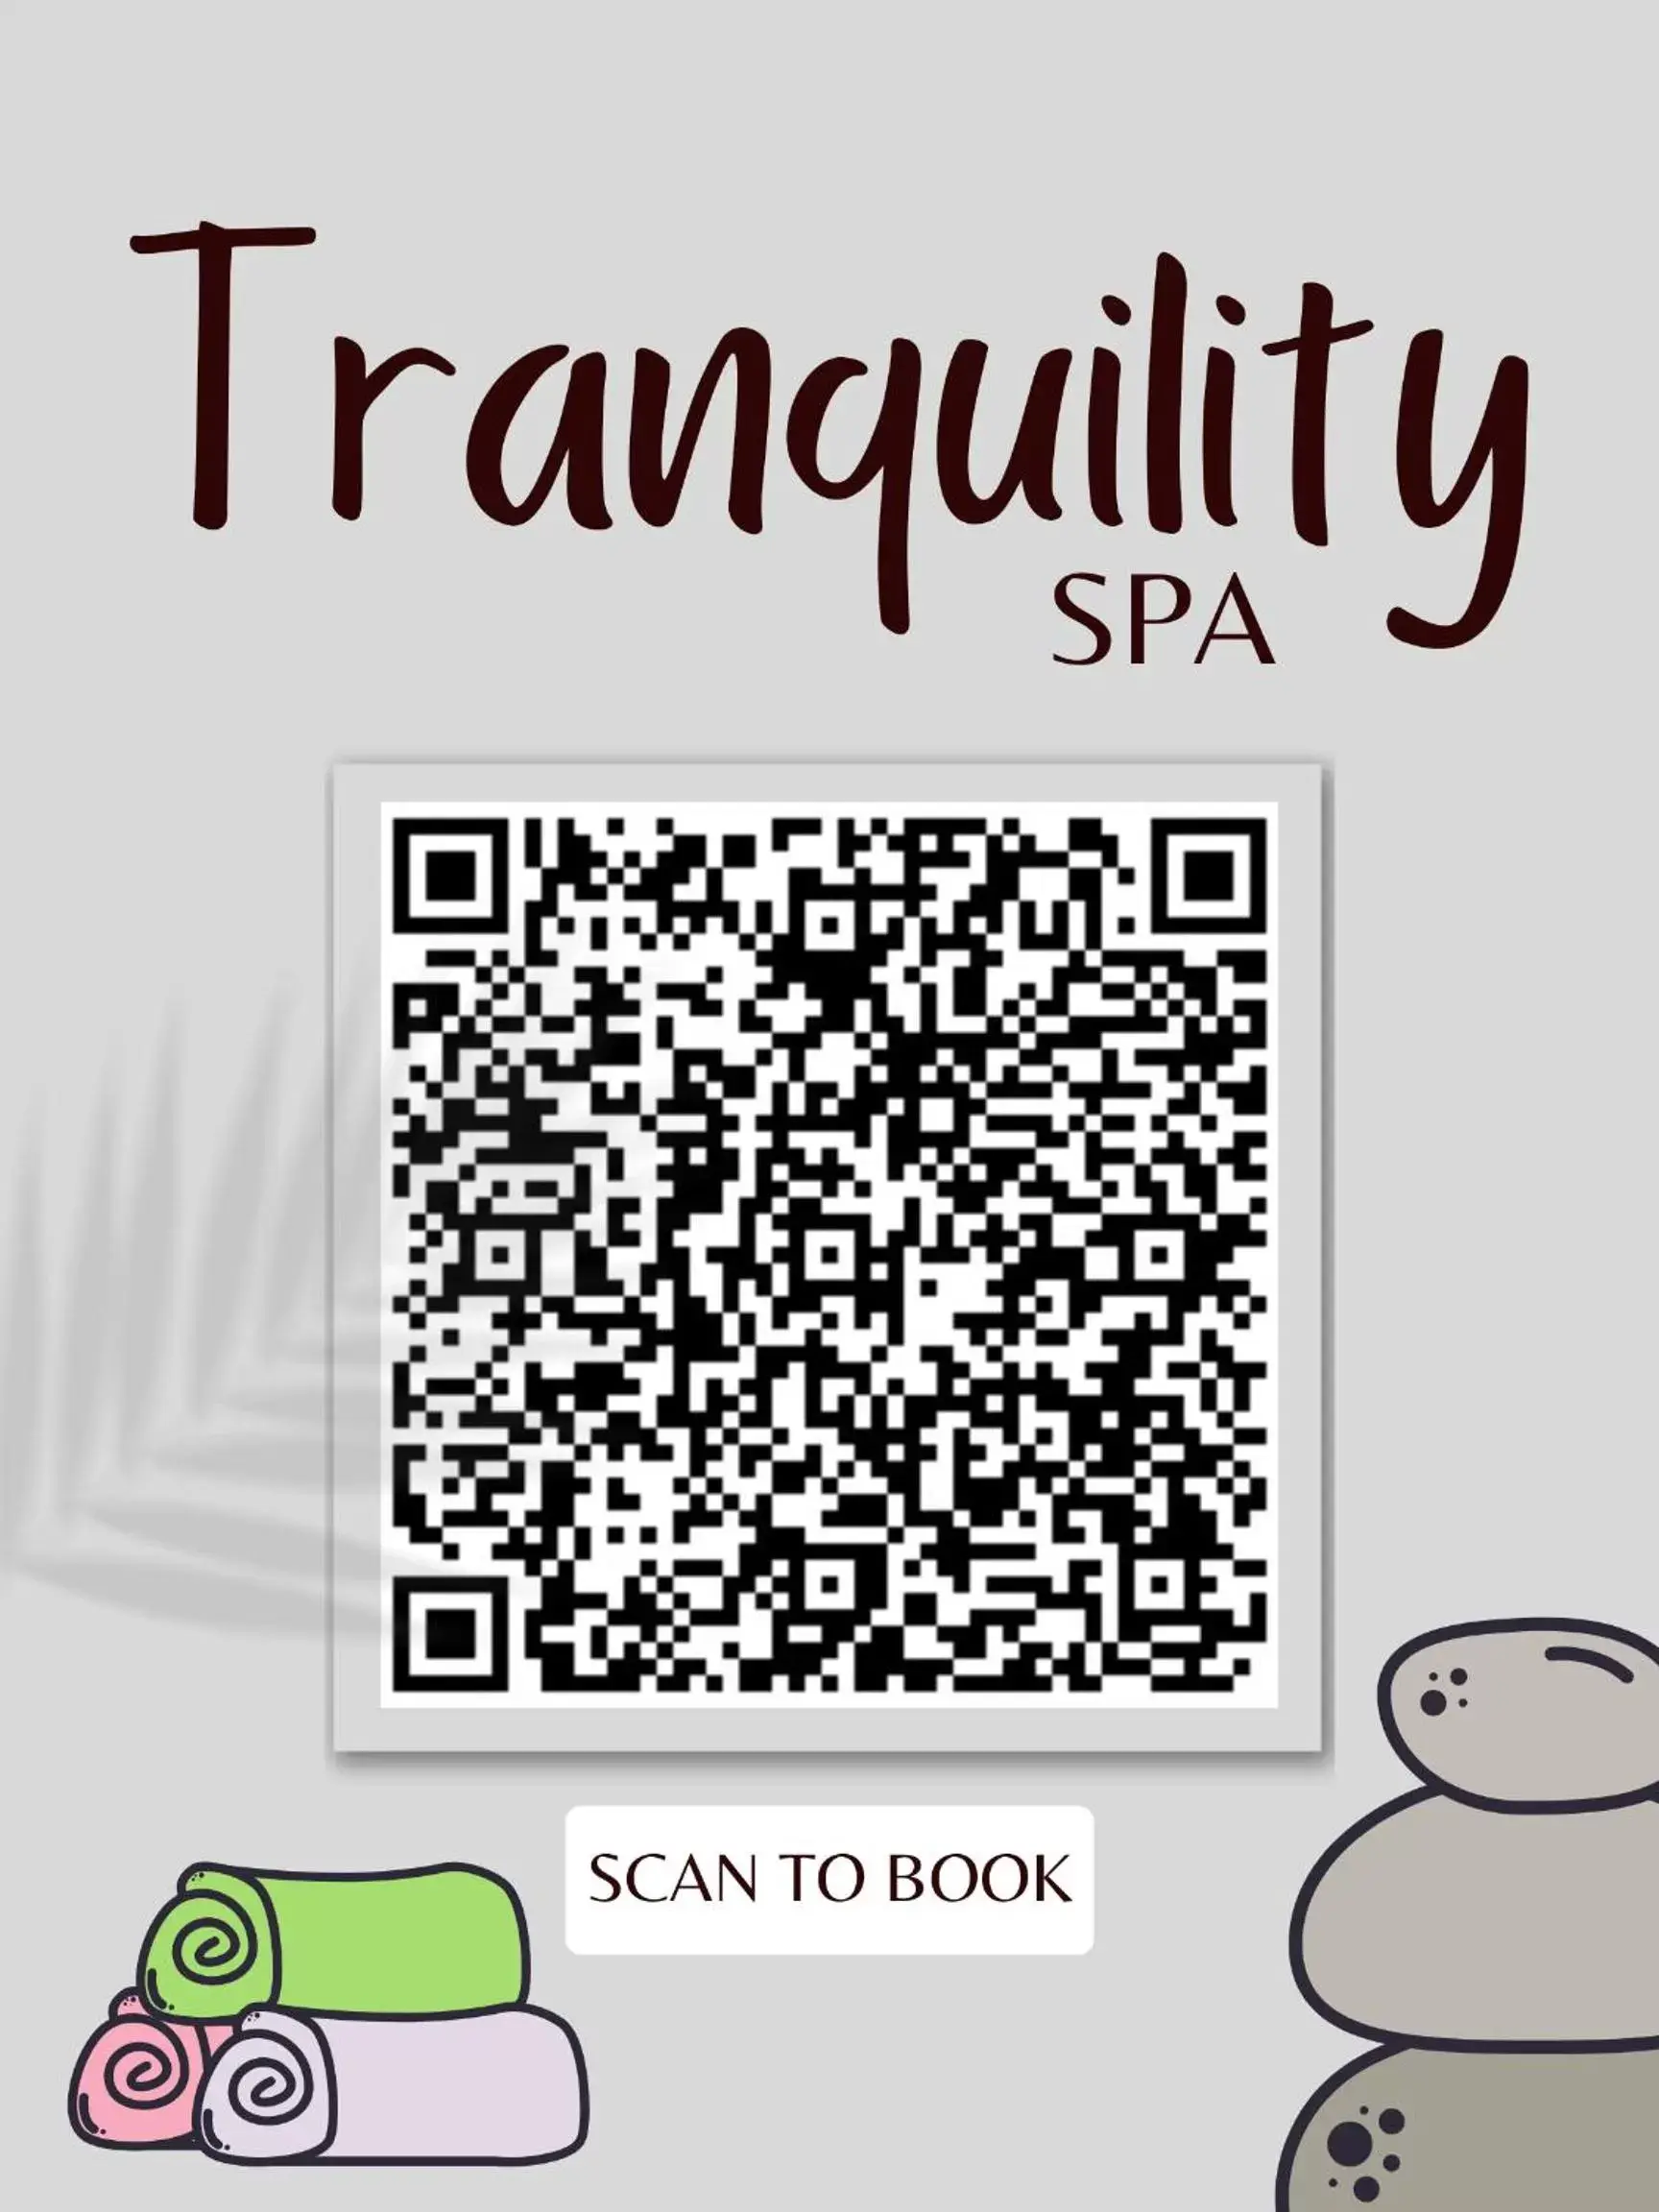 Spa and wellness centre/facilities in Super 8 by Wyndham Gananoque - Country Squire Resort